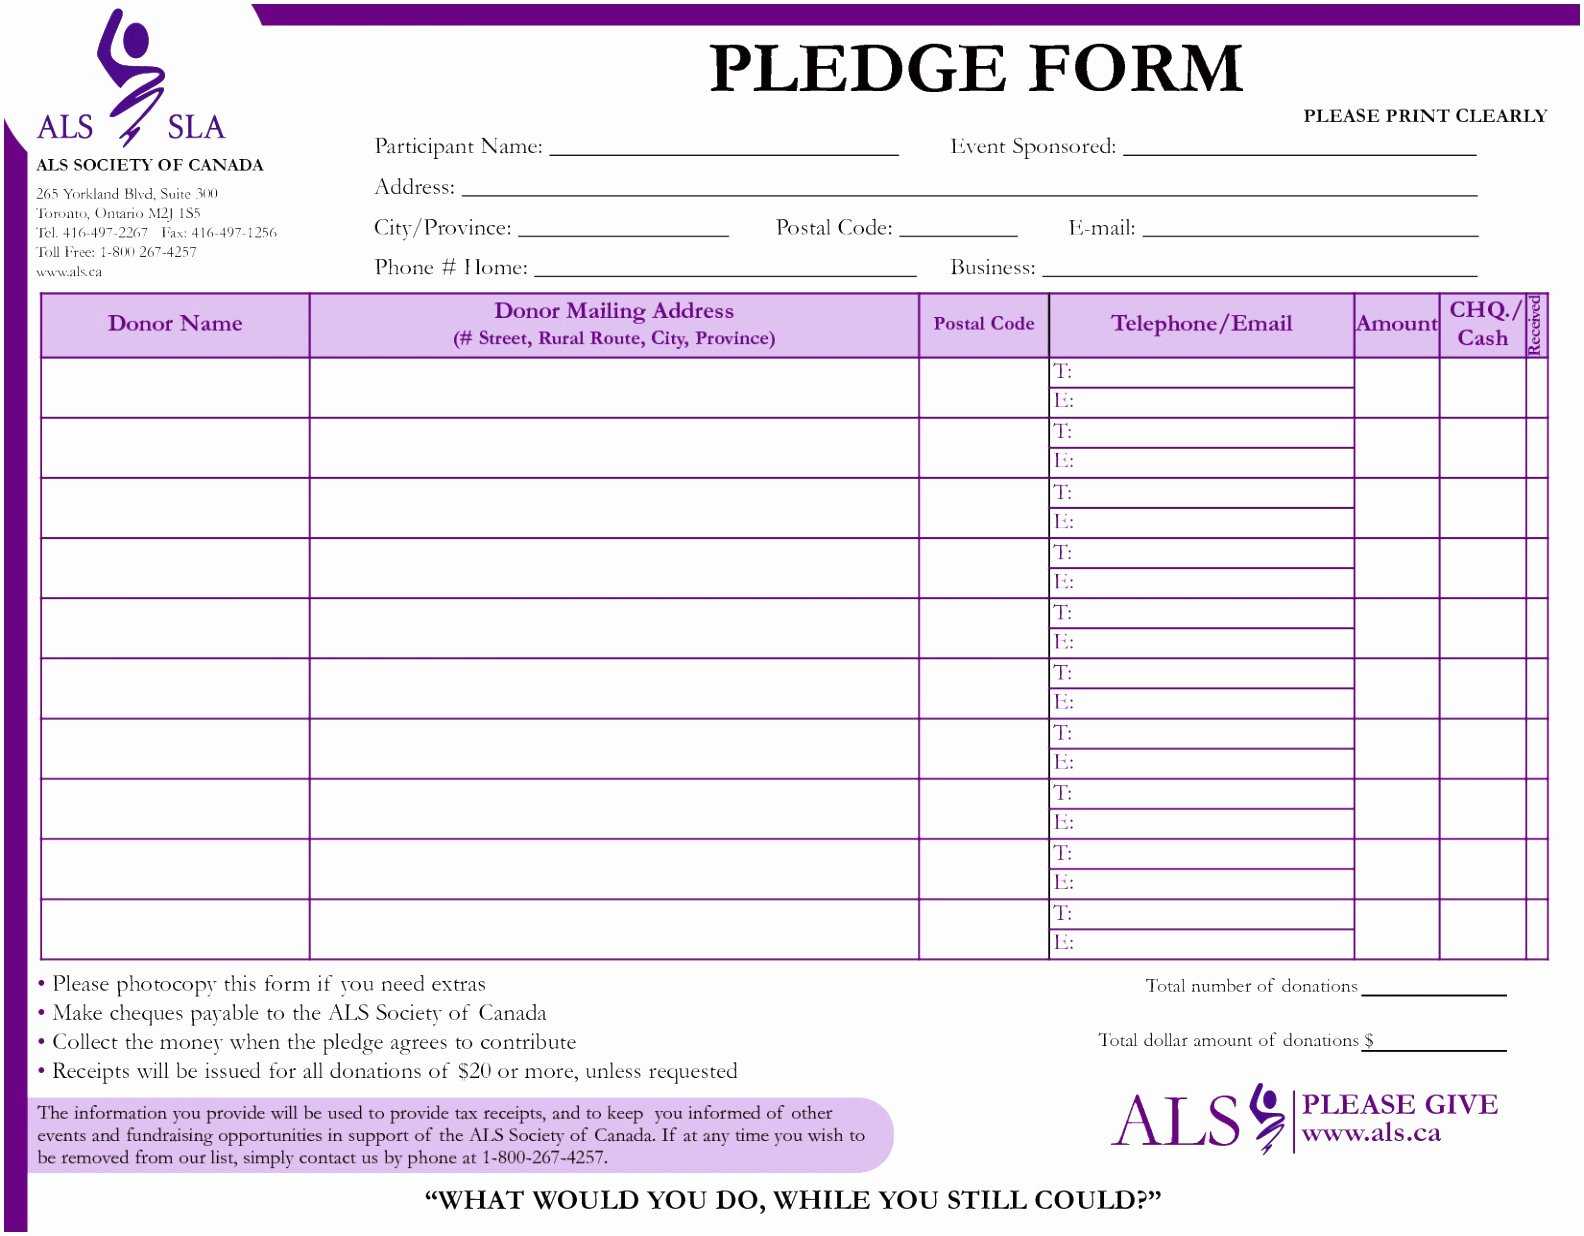 039 Pledge Card Template Word Best Of Fundraiser Form Pttyt Throughout Free Pledge Card Template